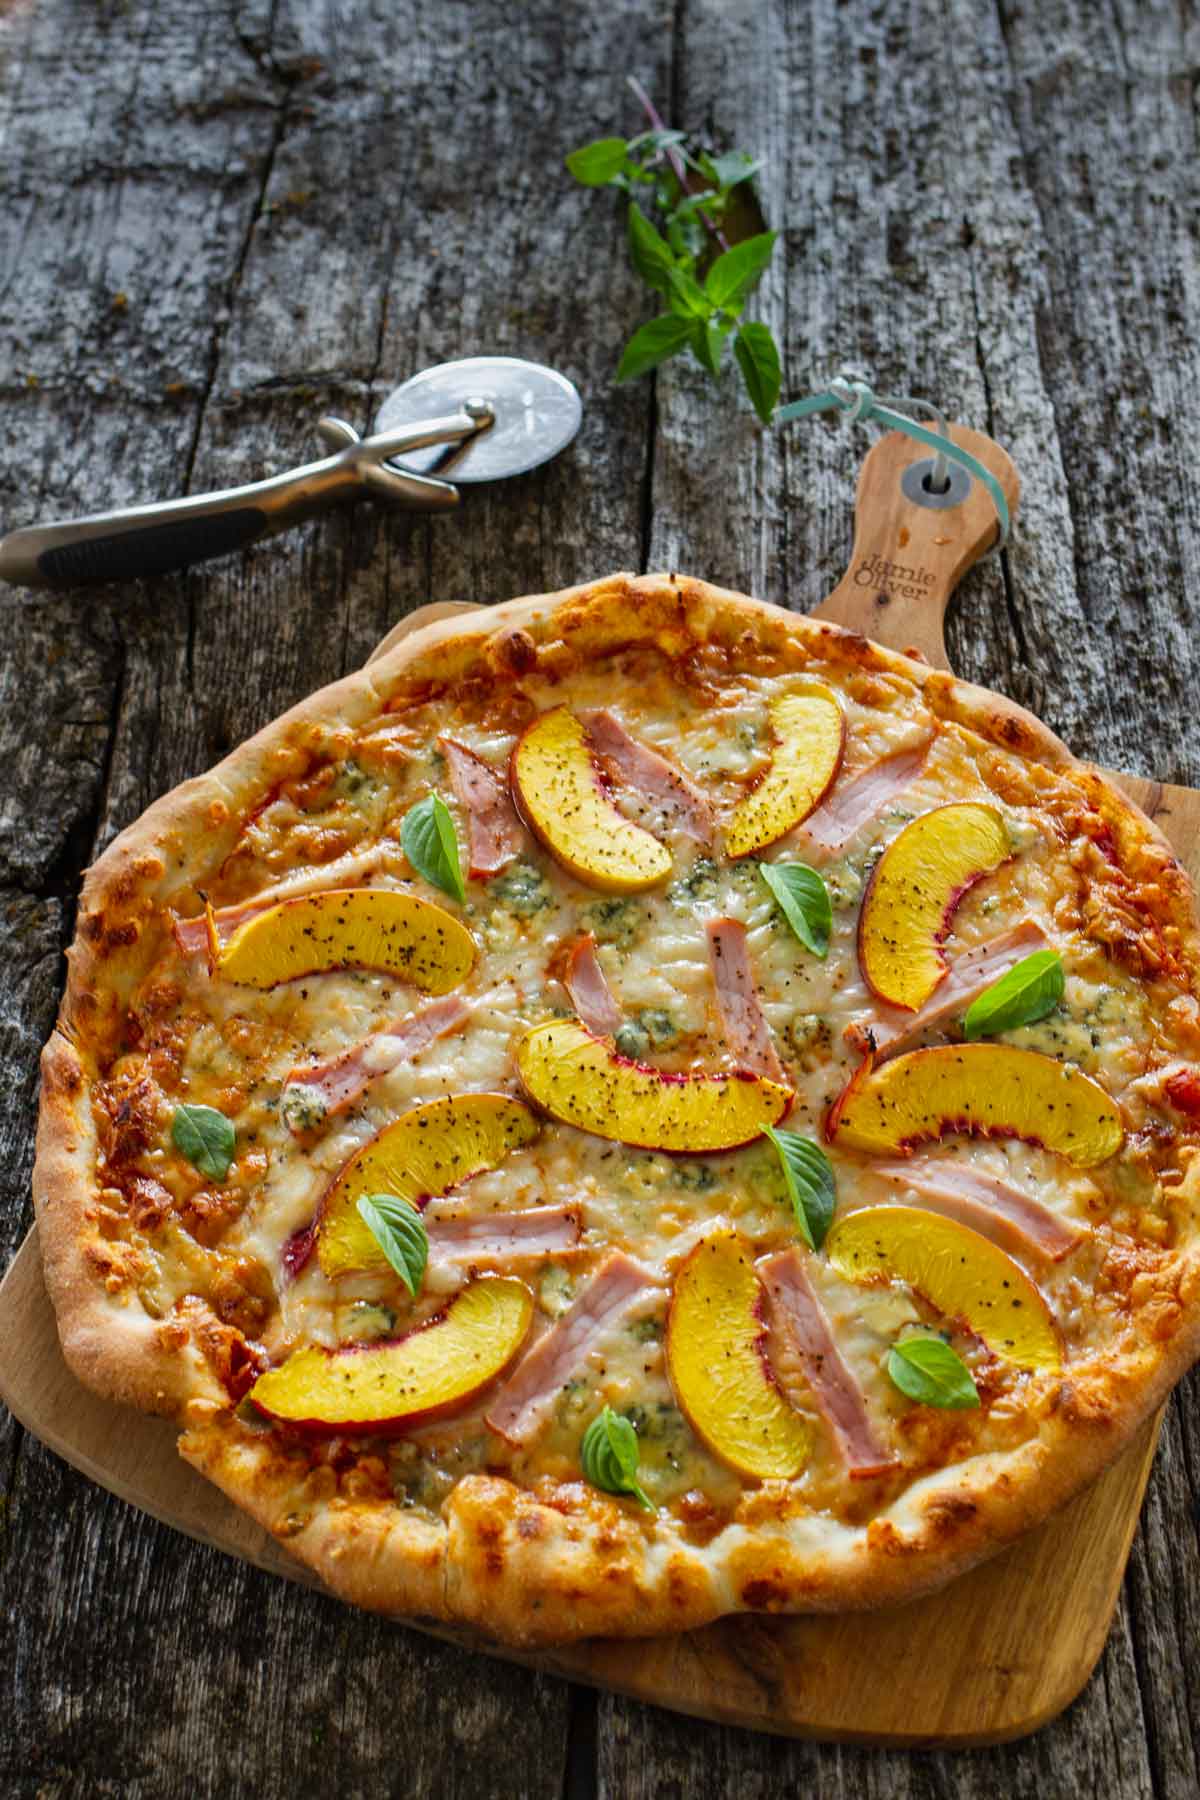 A medium size peach pizza, hot out of the oven